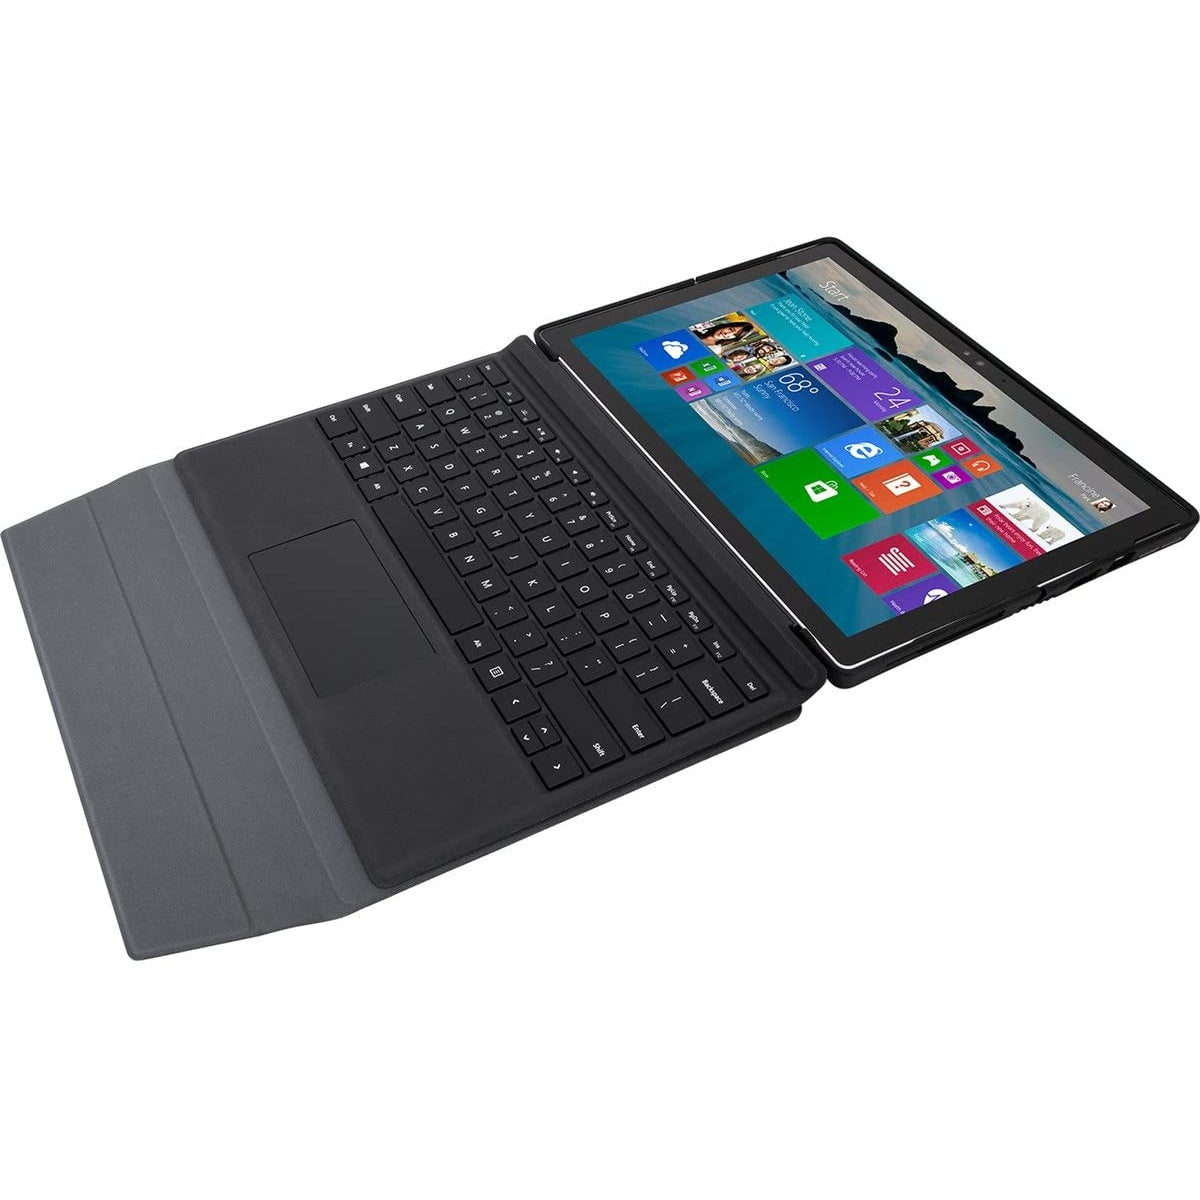 Targus Folio Wrap Case and Stand for Microsoft Surface Pro 4 THZ618GL - Black